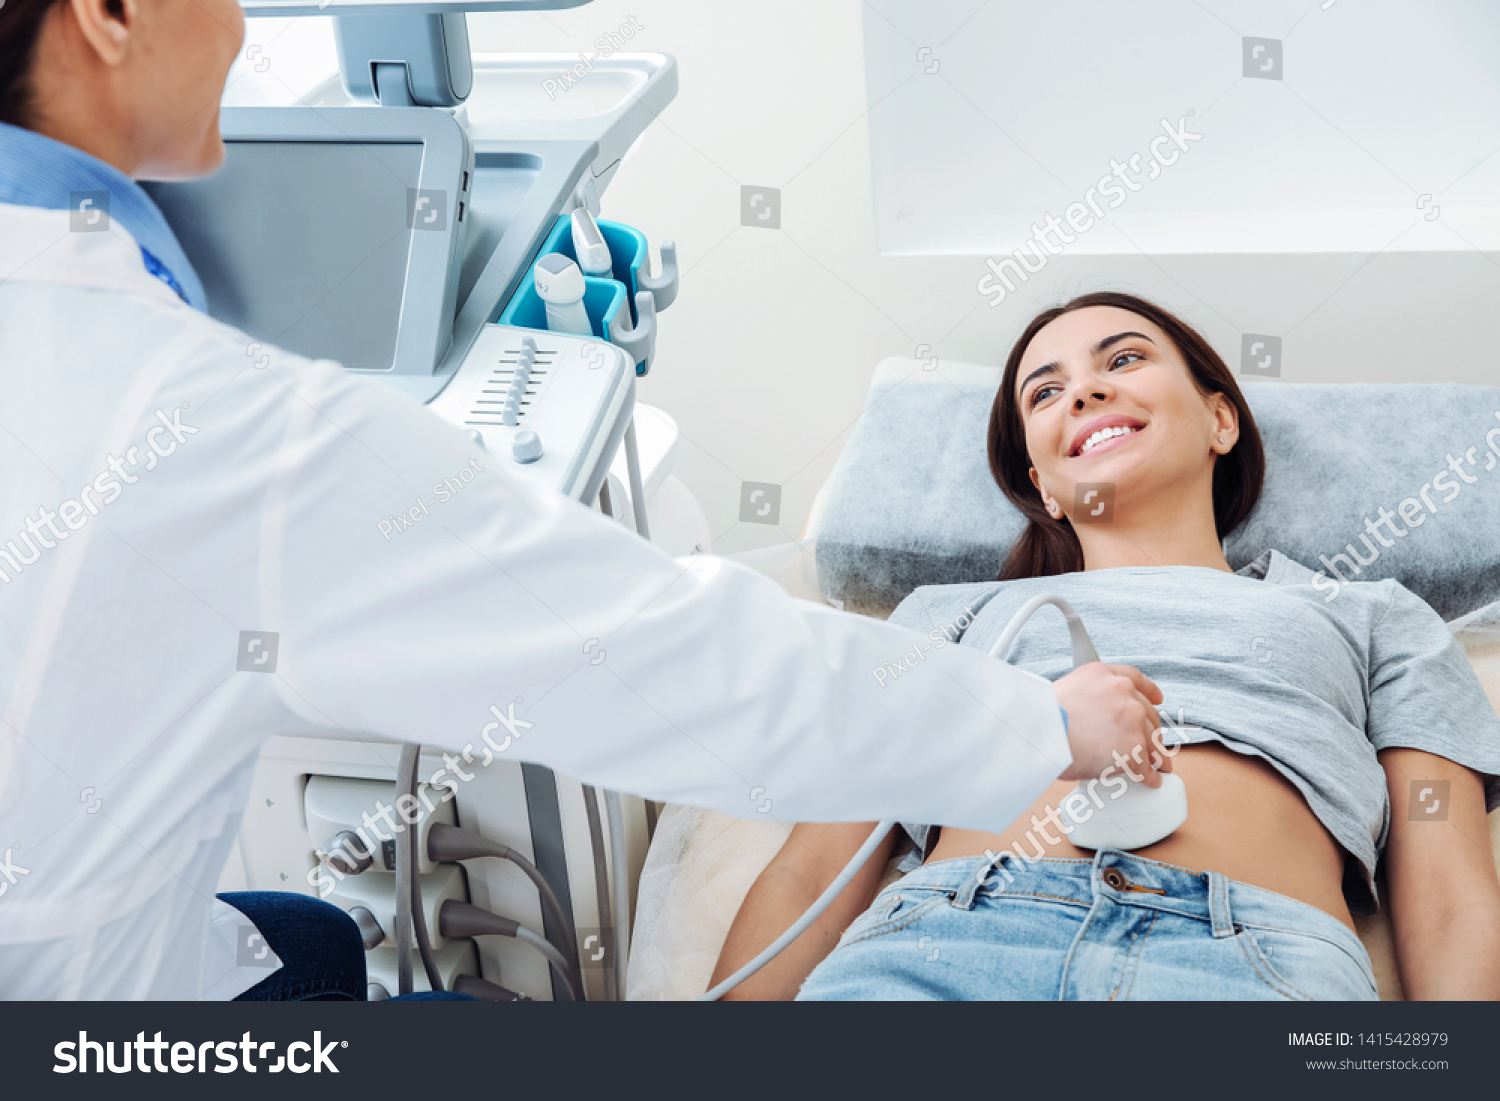 Woman undergoing ultrasound scan in clinic #1415428979